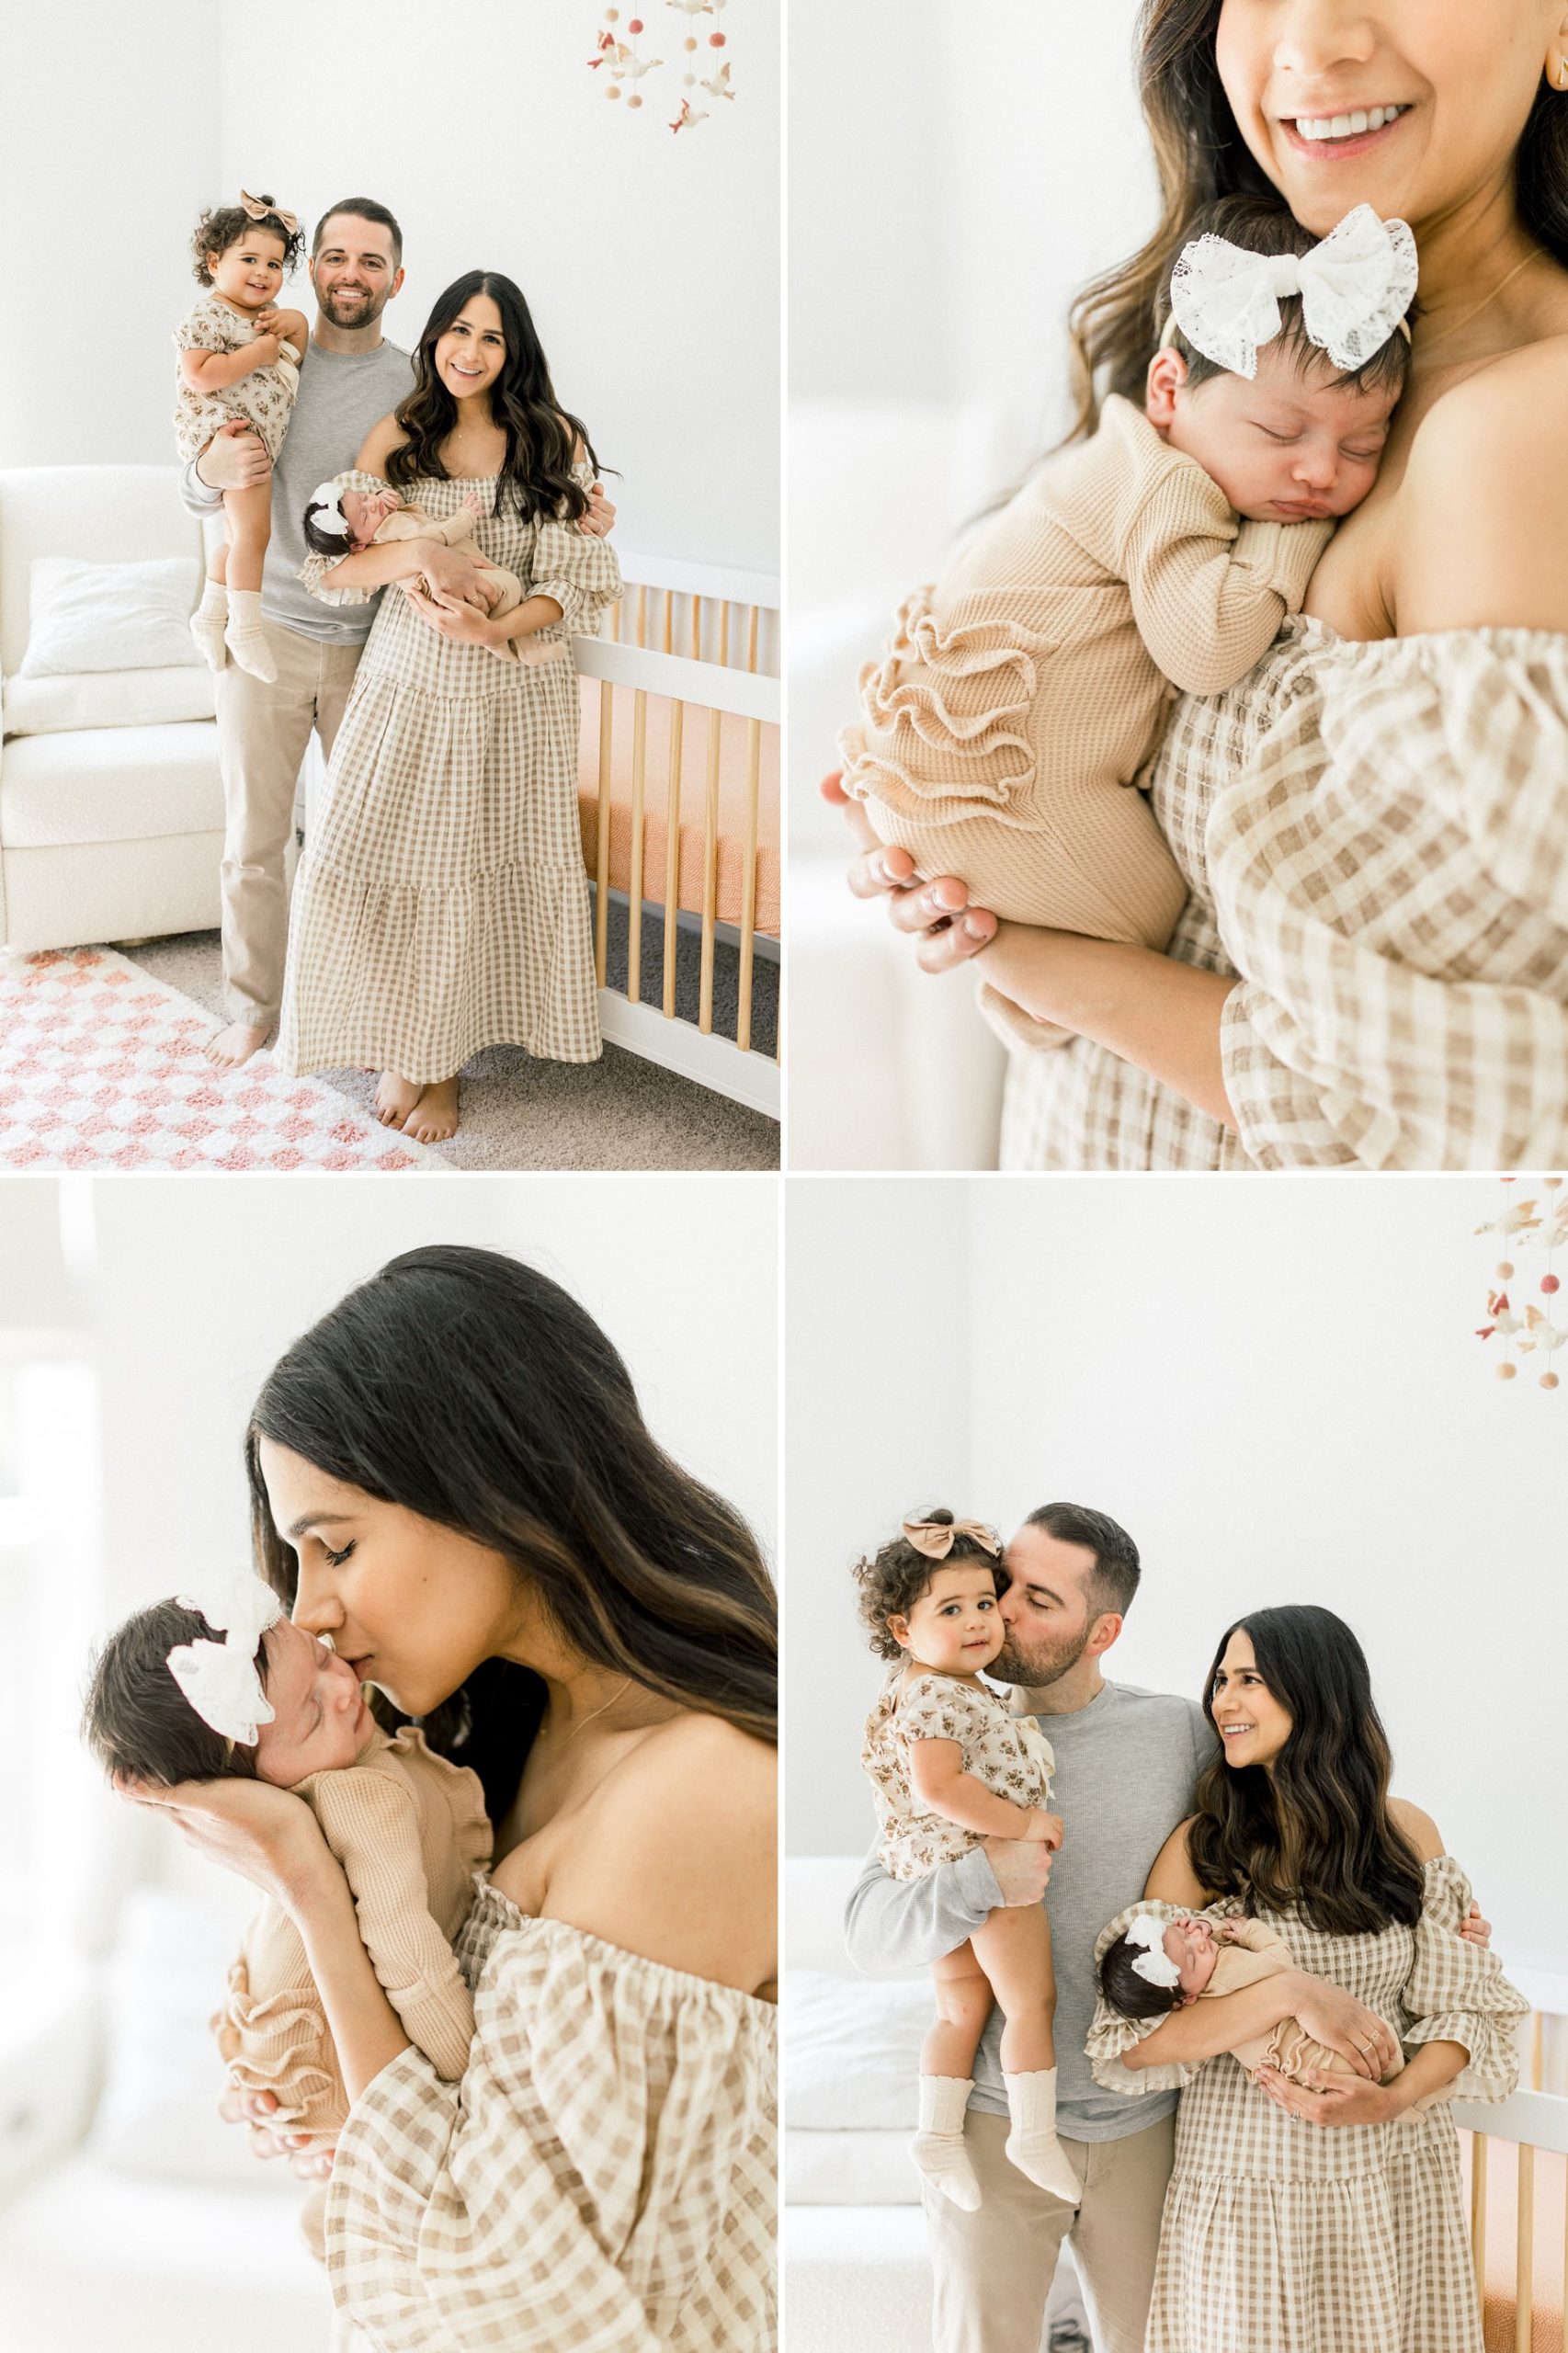 Lifestyle newborn session in a neutral nursery with natural light, white walls, and the mom wearing a flowy dress by Nothing Fits But